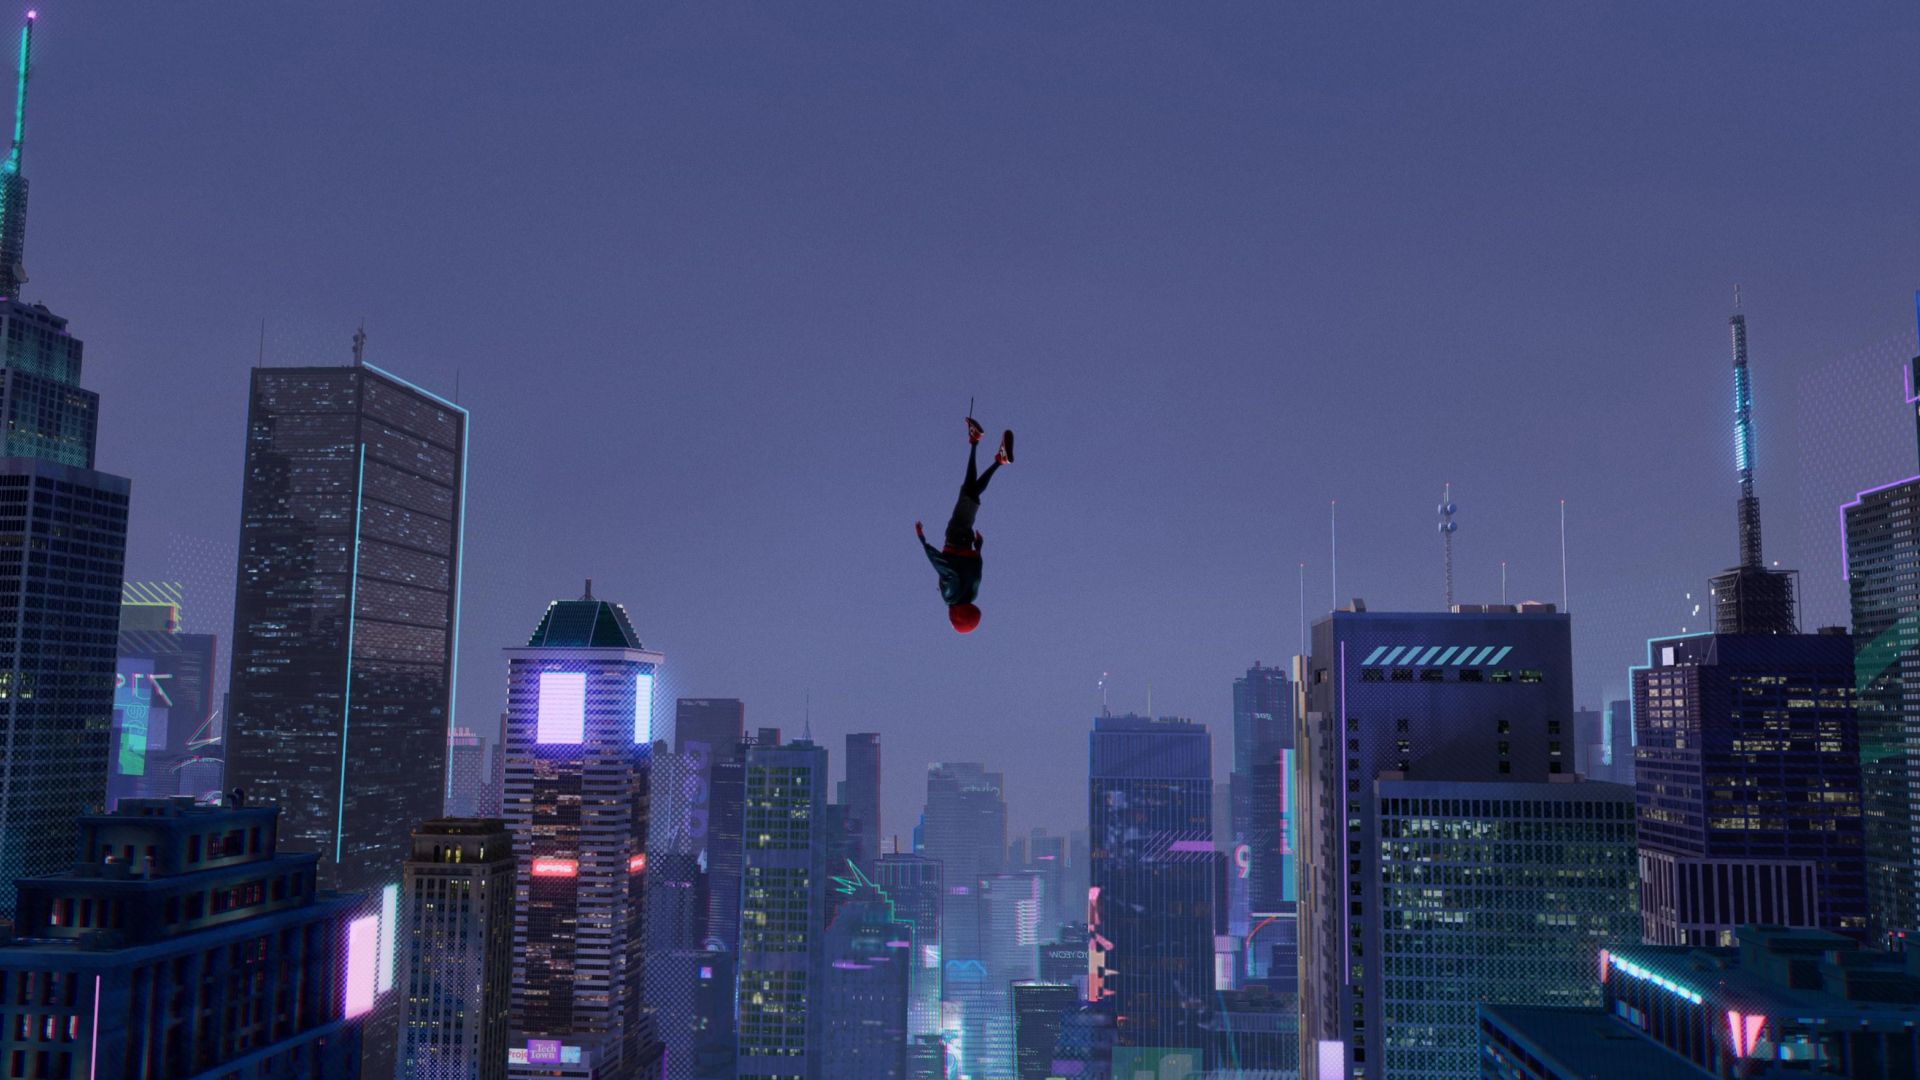 Into the Spiderverse wallpaper in 1920x1080 resolution